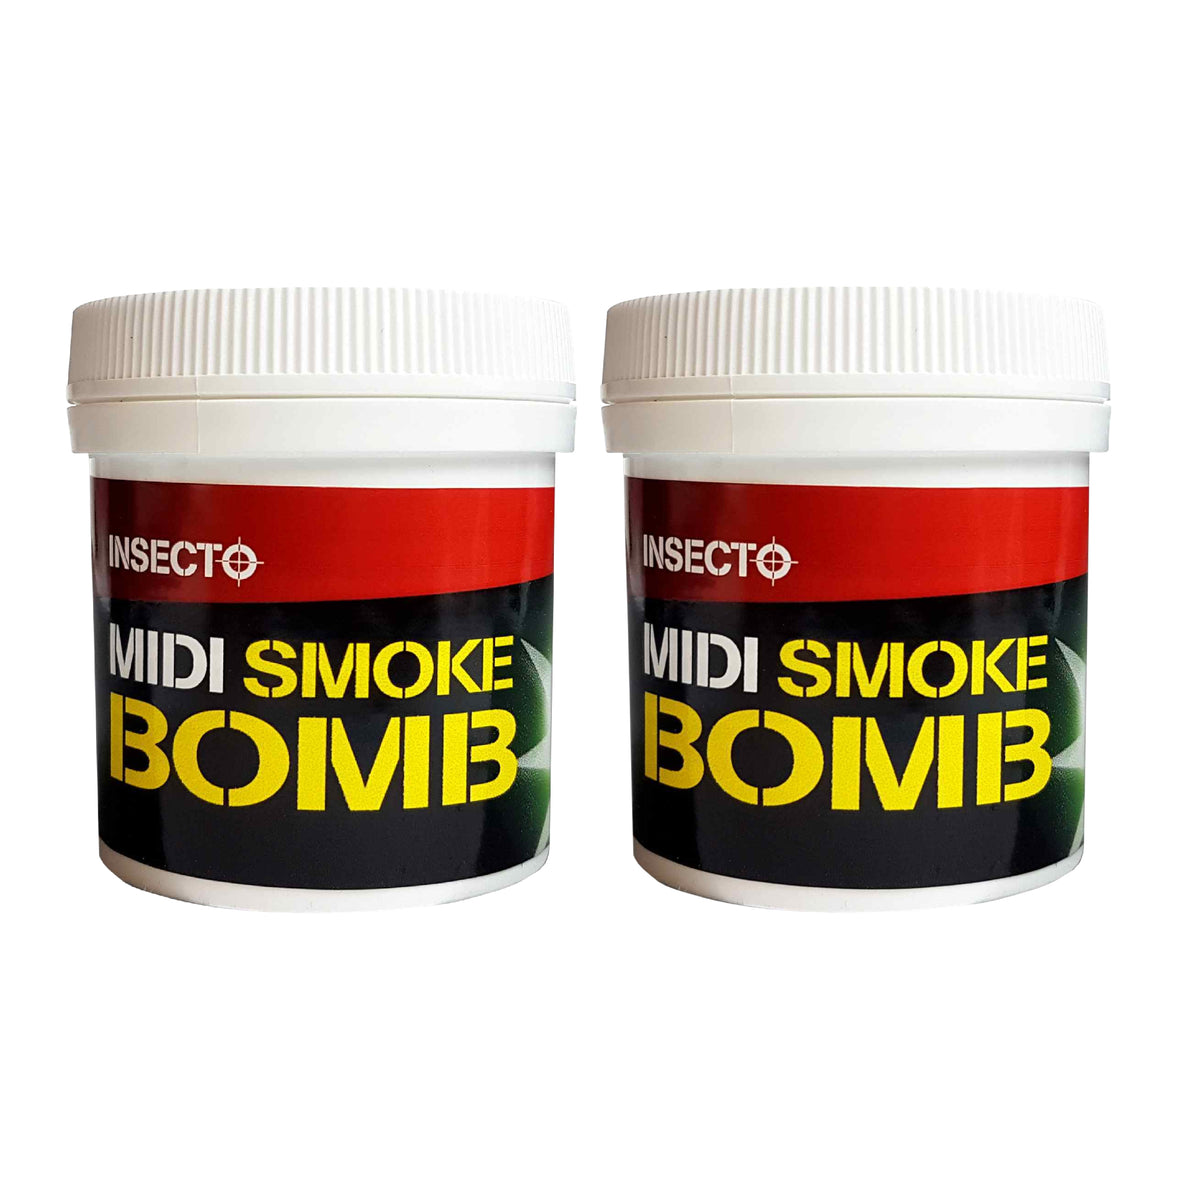 Bed Bug Killer Smoke Bomb 15.5g (Pack of 2) - Moth Control